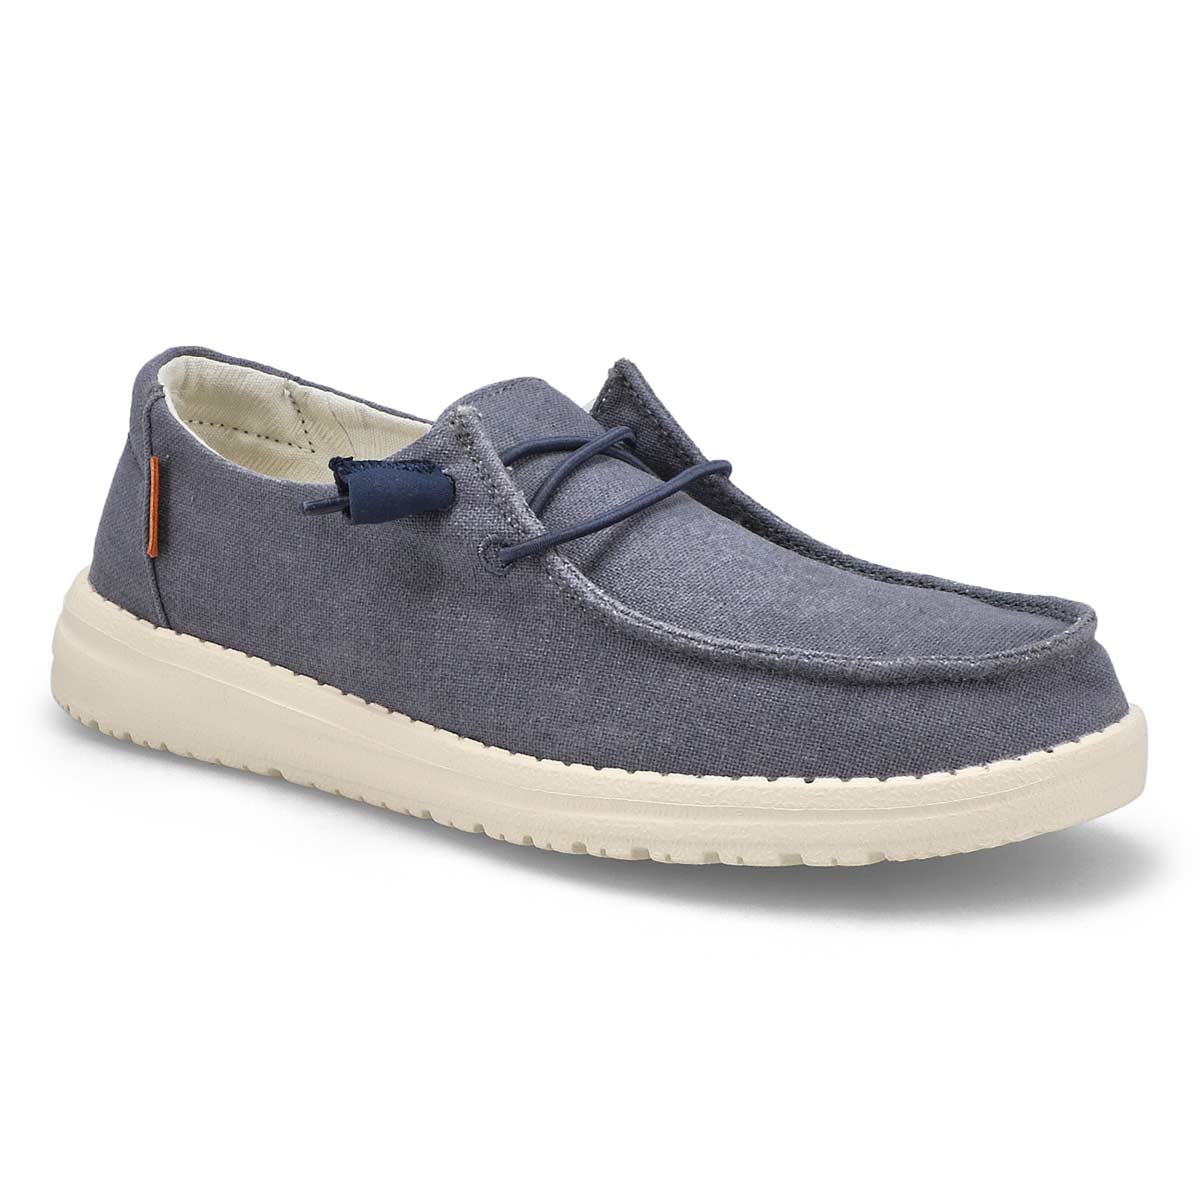 HEYDUDE Women's Wendy Casual Shoes